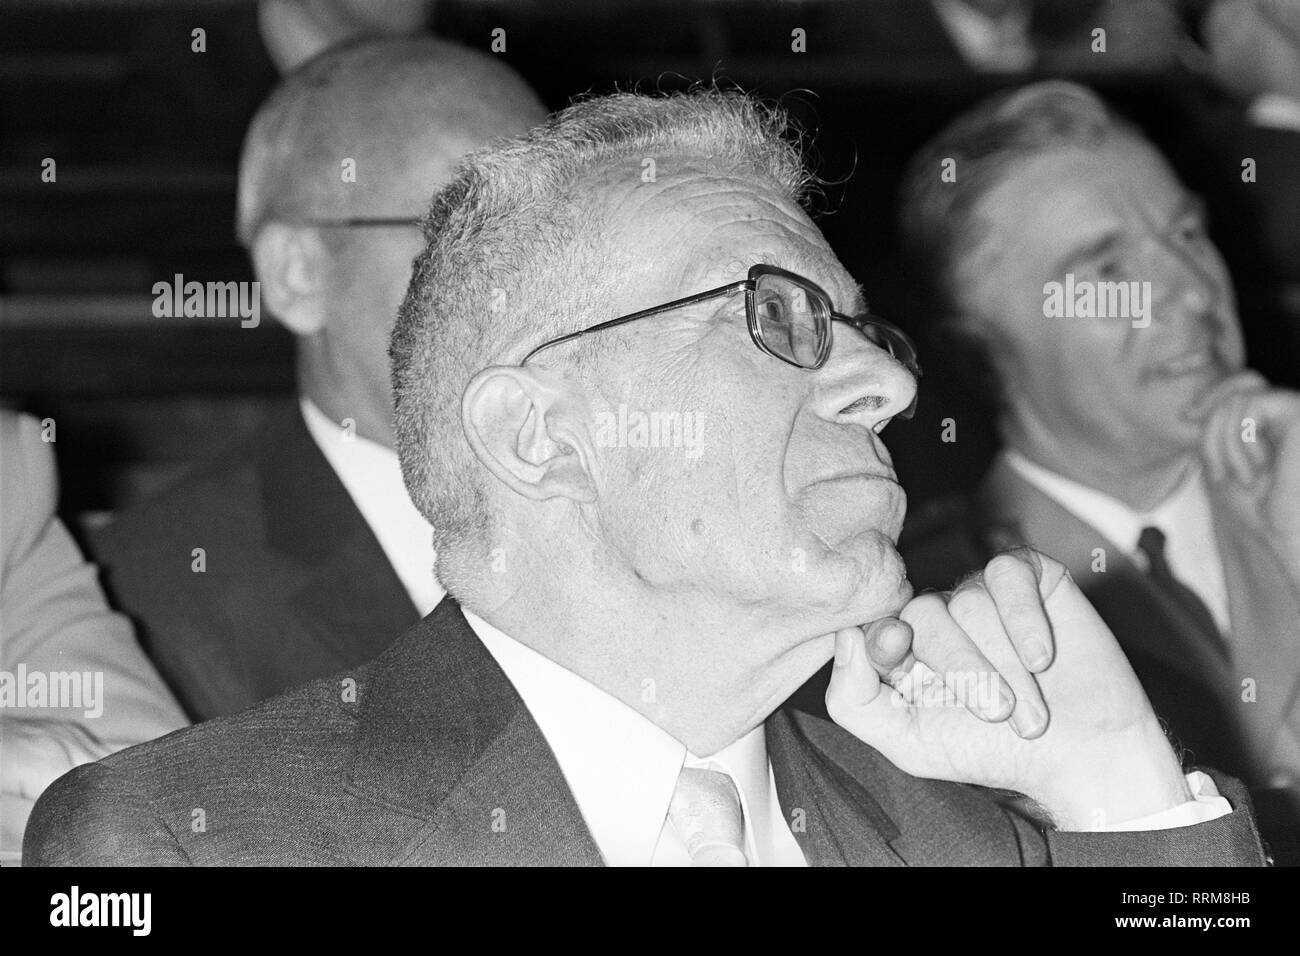 Asperger, Hans, 18.2.1906 - 21.10.1980, Austrian pediatrician and remedail teacher, portrait, at a meeting, circa 1970, Additional-Rights-Clearance-Info-Not-Available Stock Photo